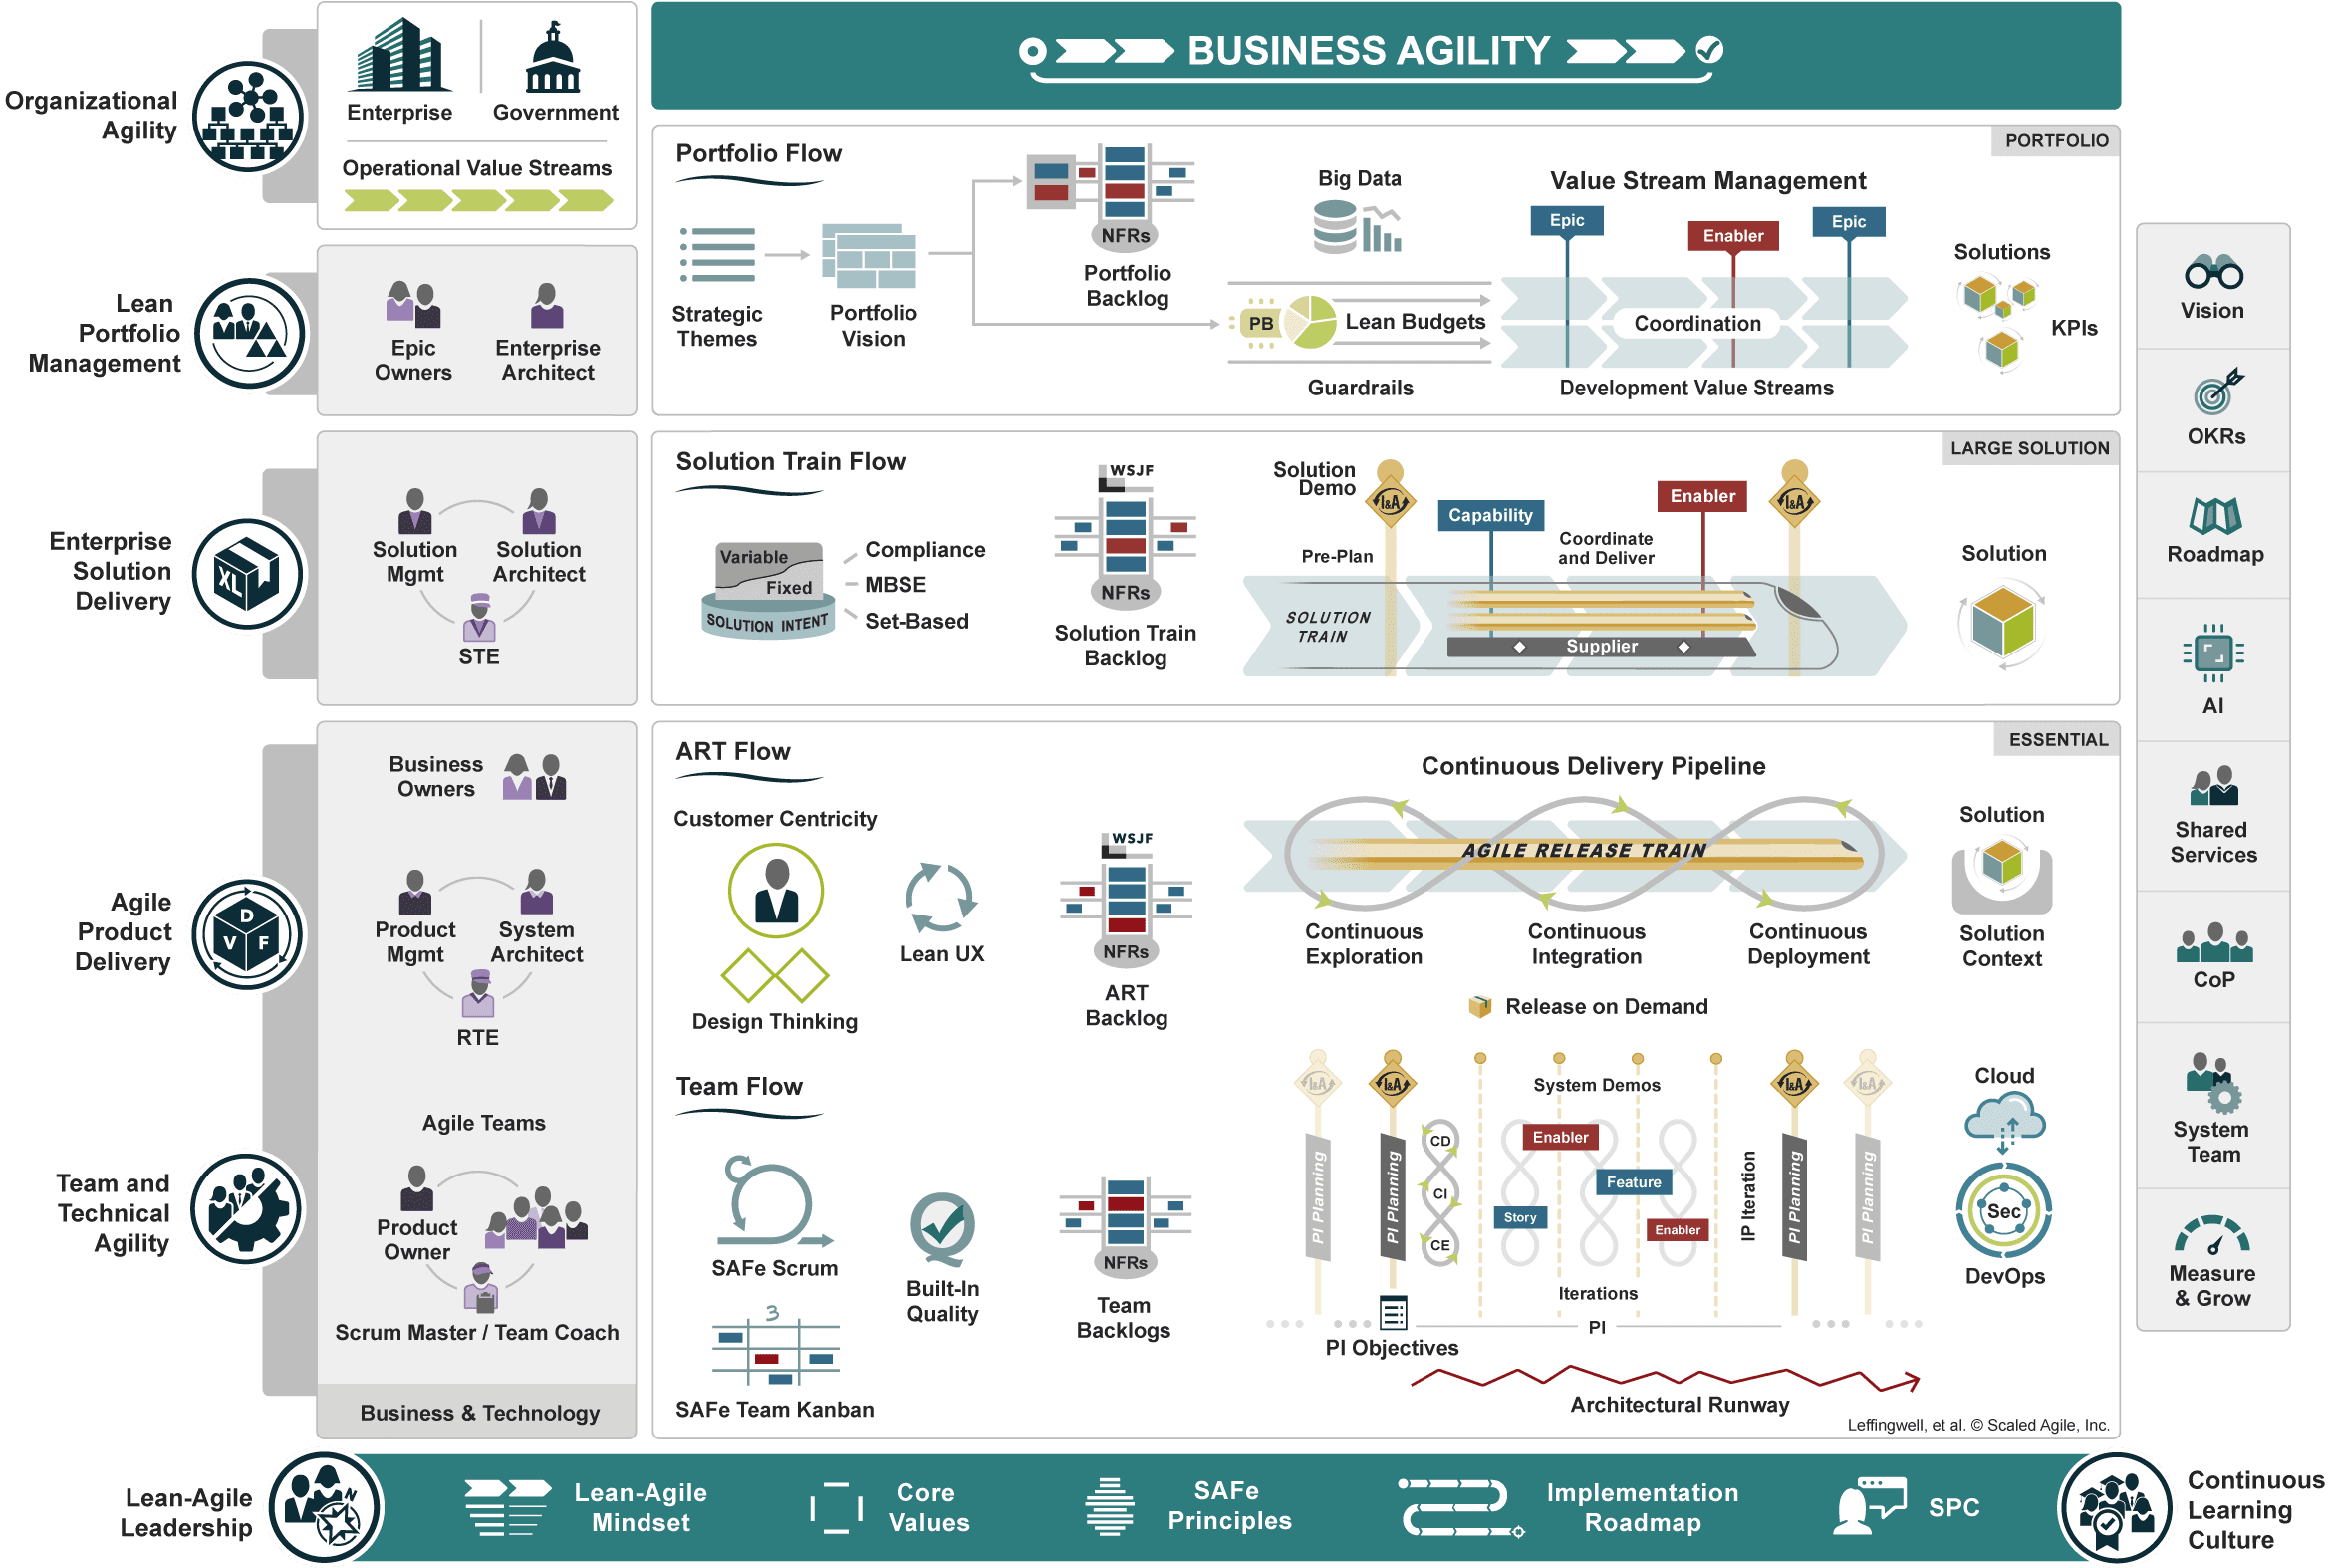 SAFe Scaled Agile Framework Explained - Why You Should Consider It for Your Organization?